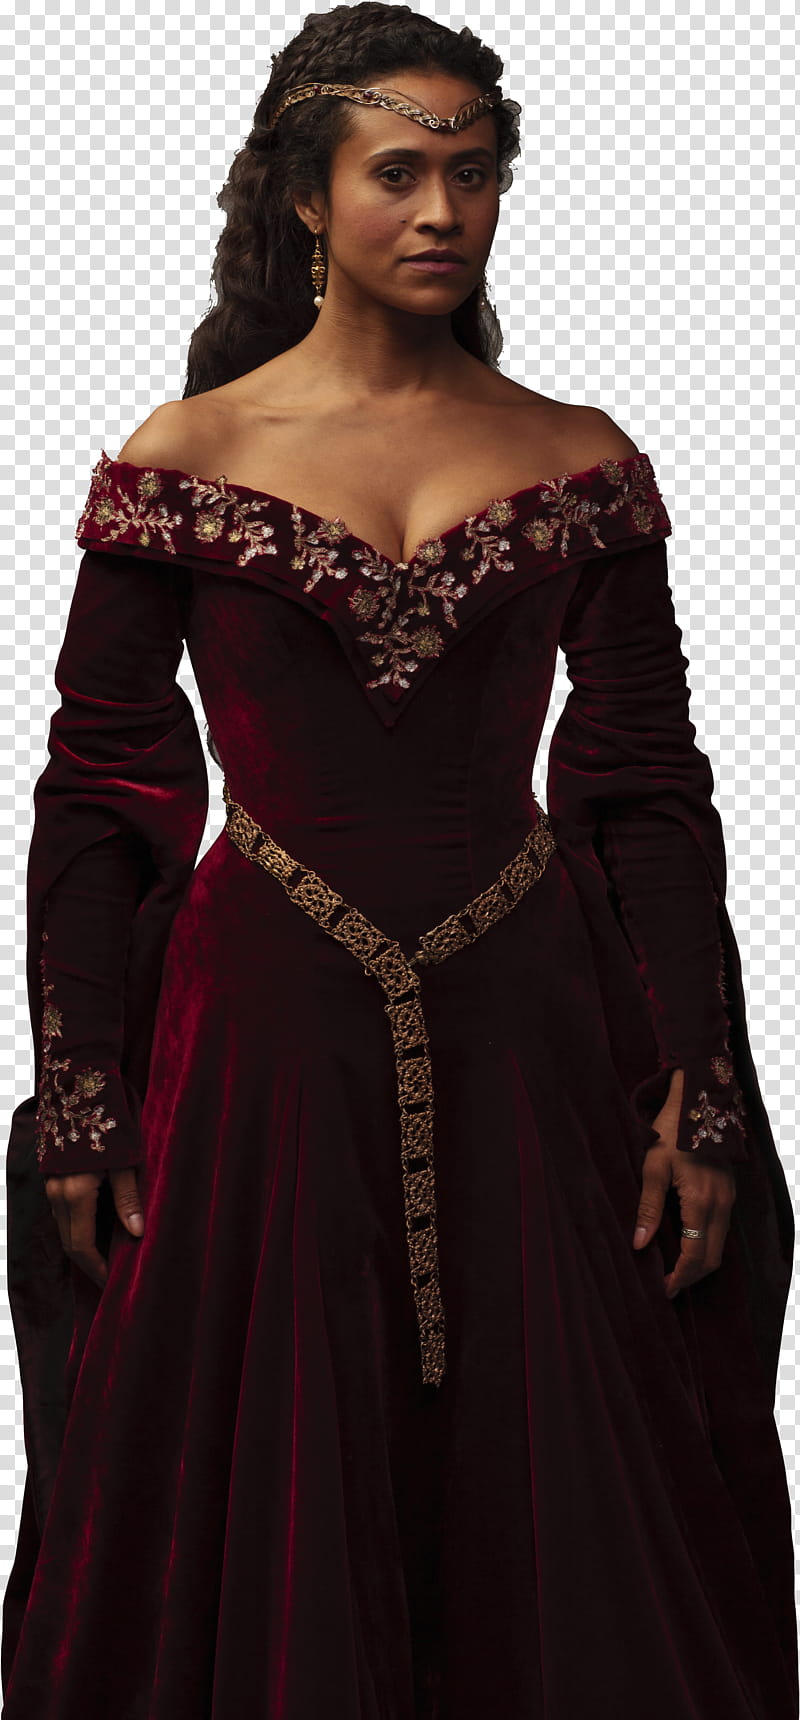 Guinevere BBC Merlin  transparent background PNG clipart